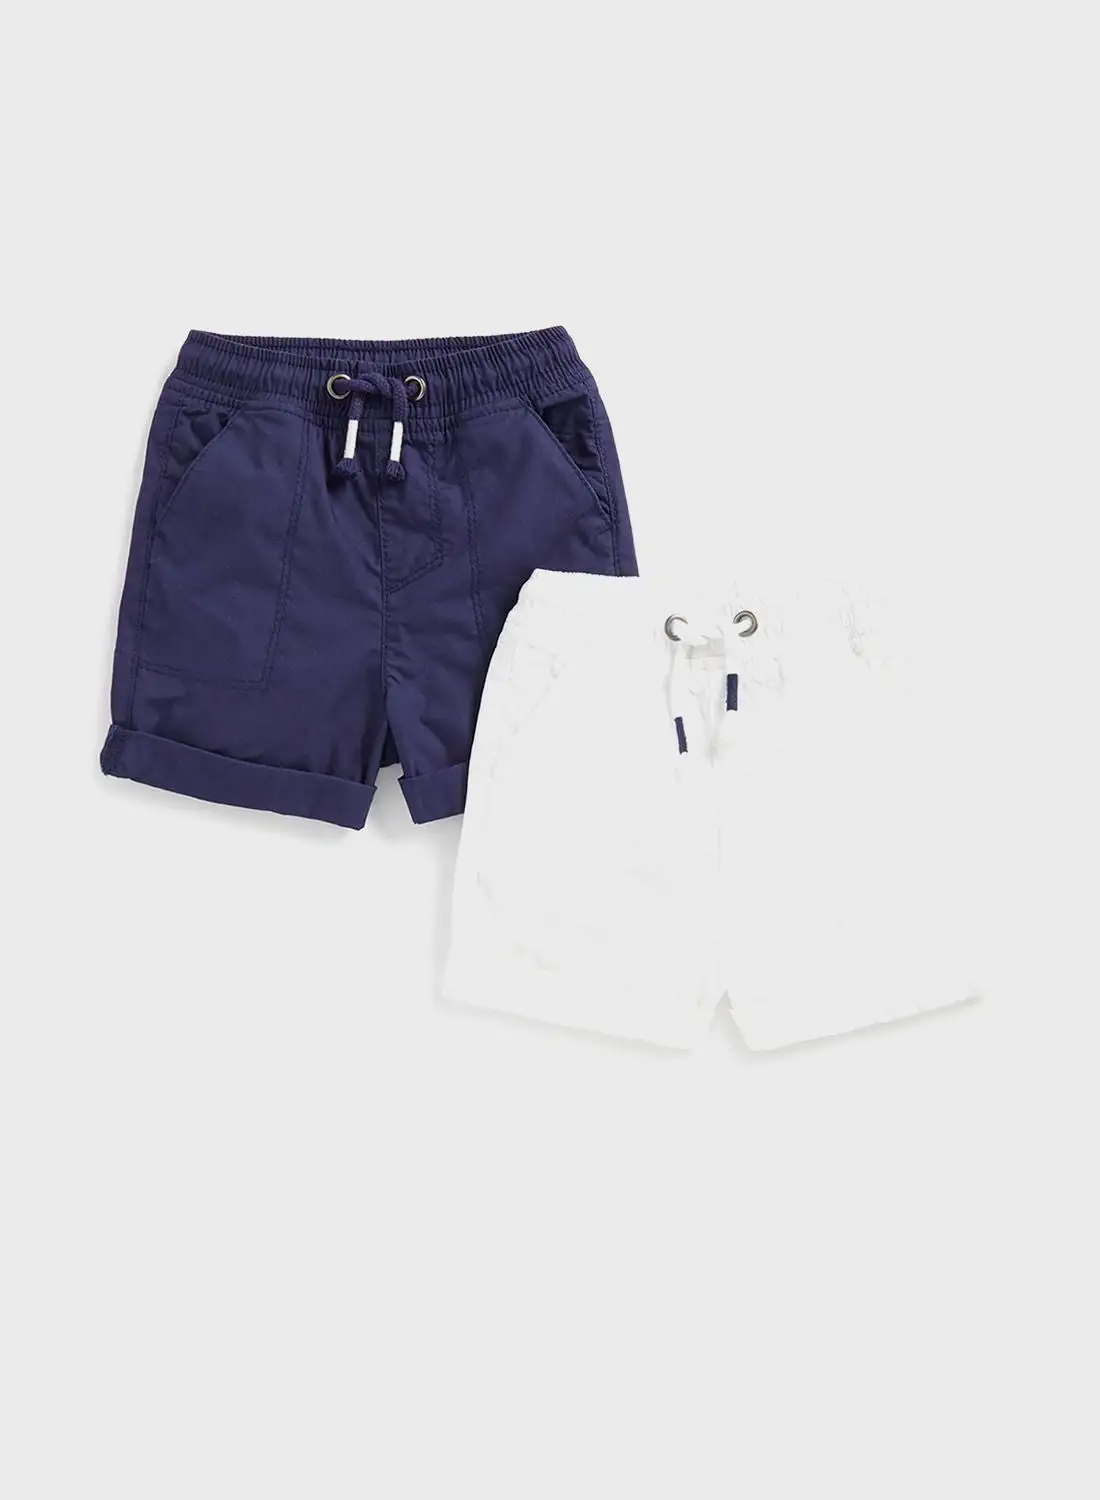 mothercare Kids 2 Pack Assorted Shorts